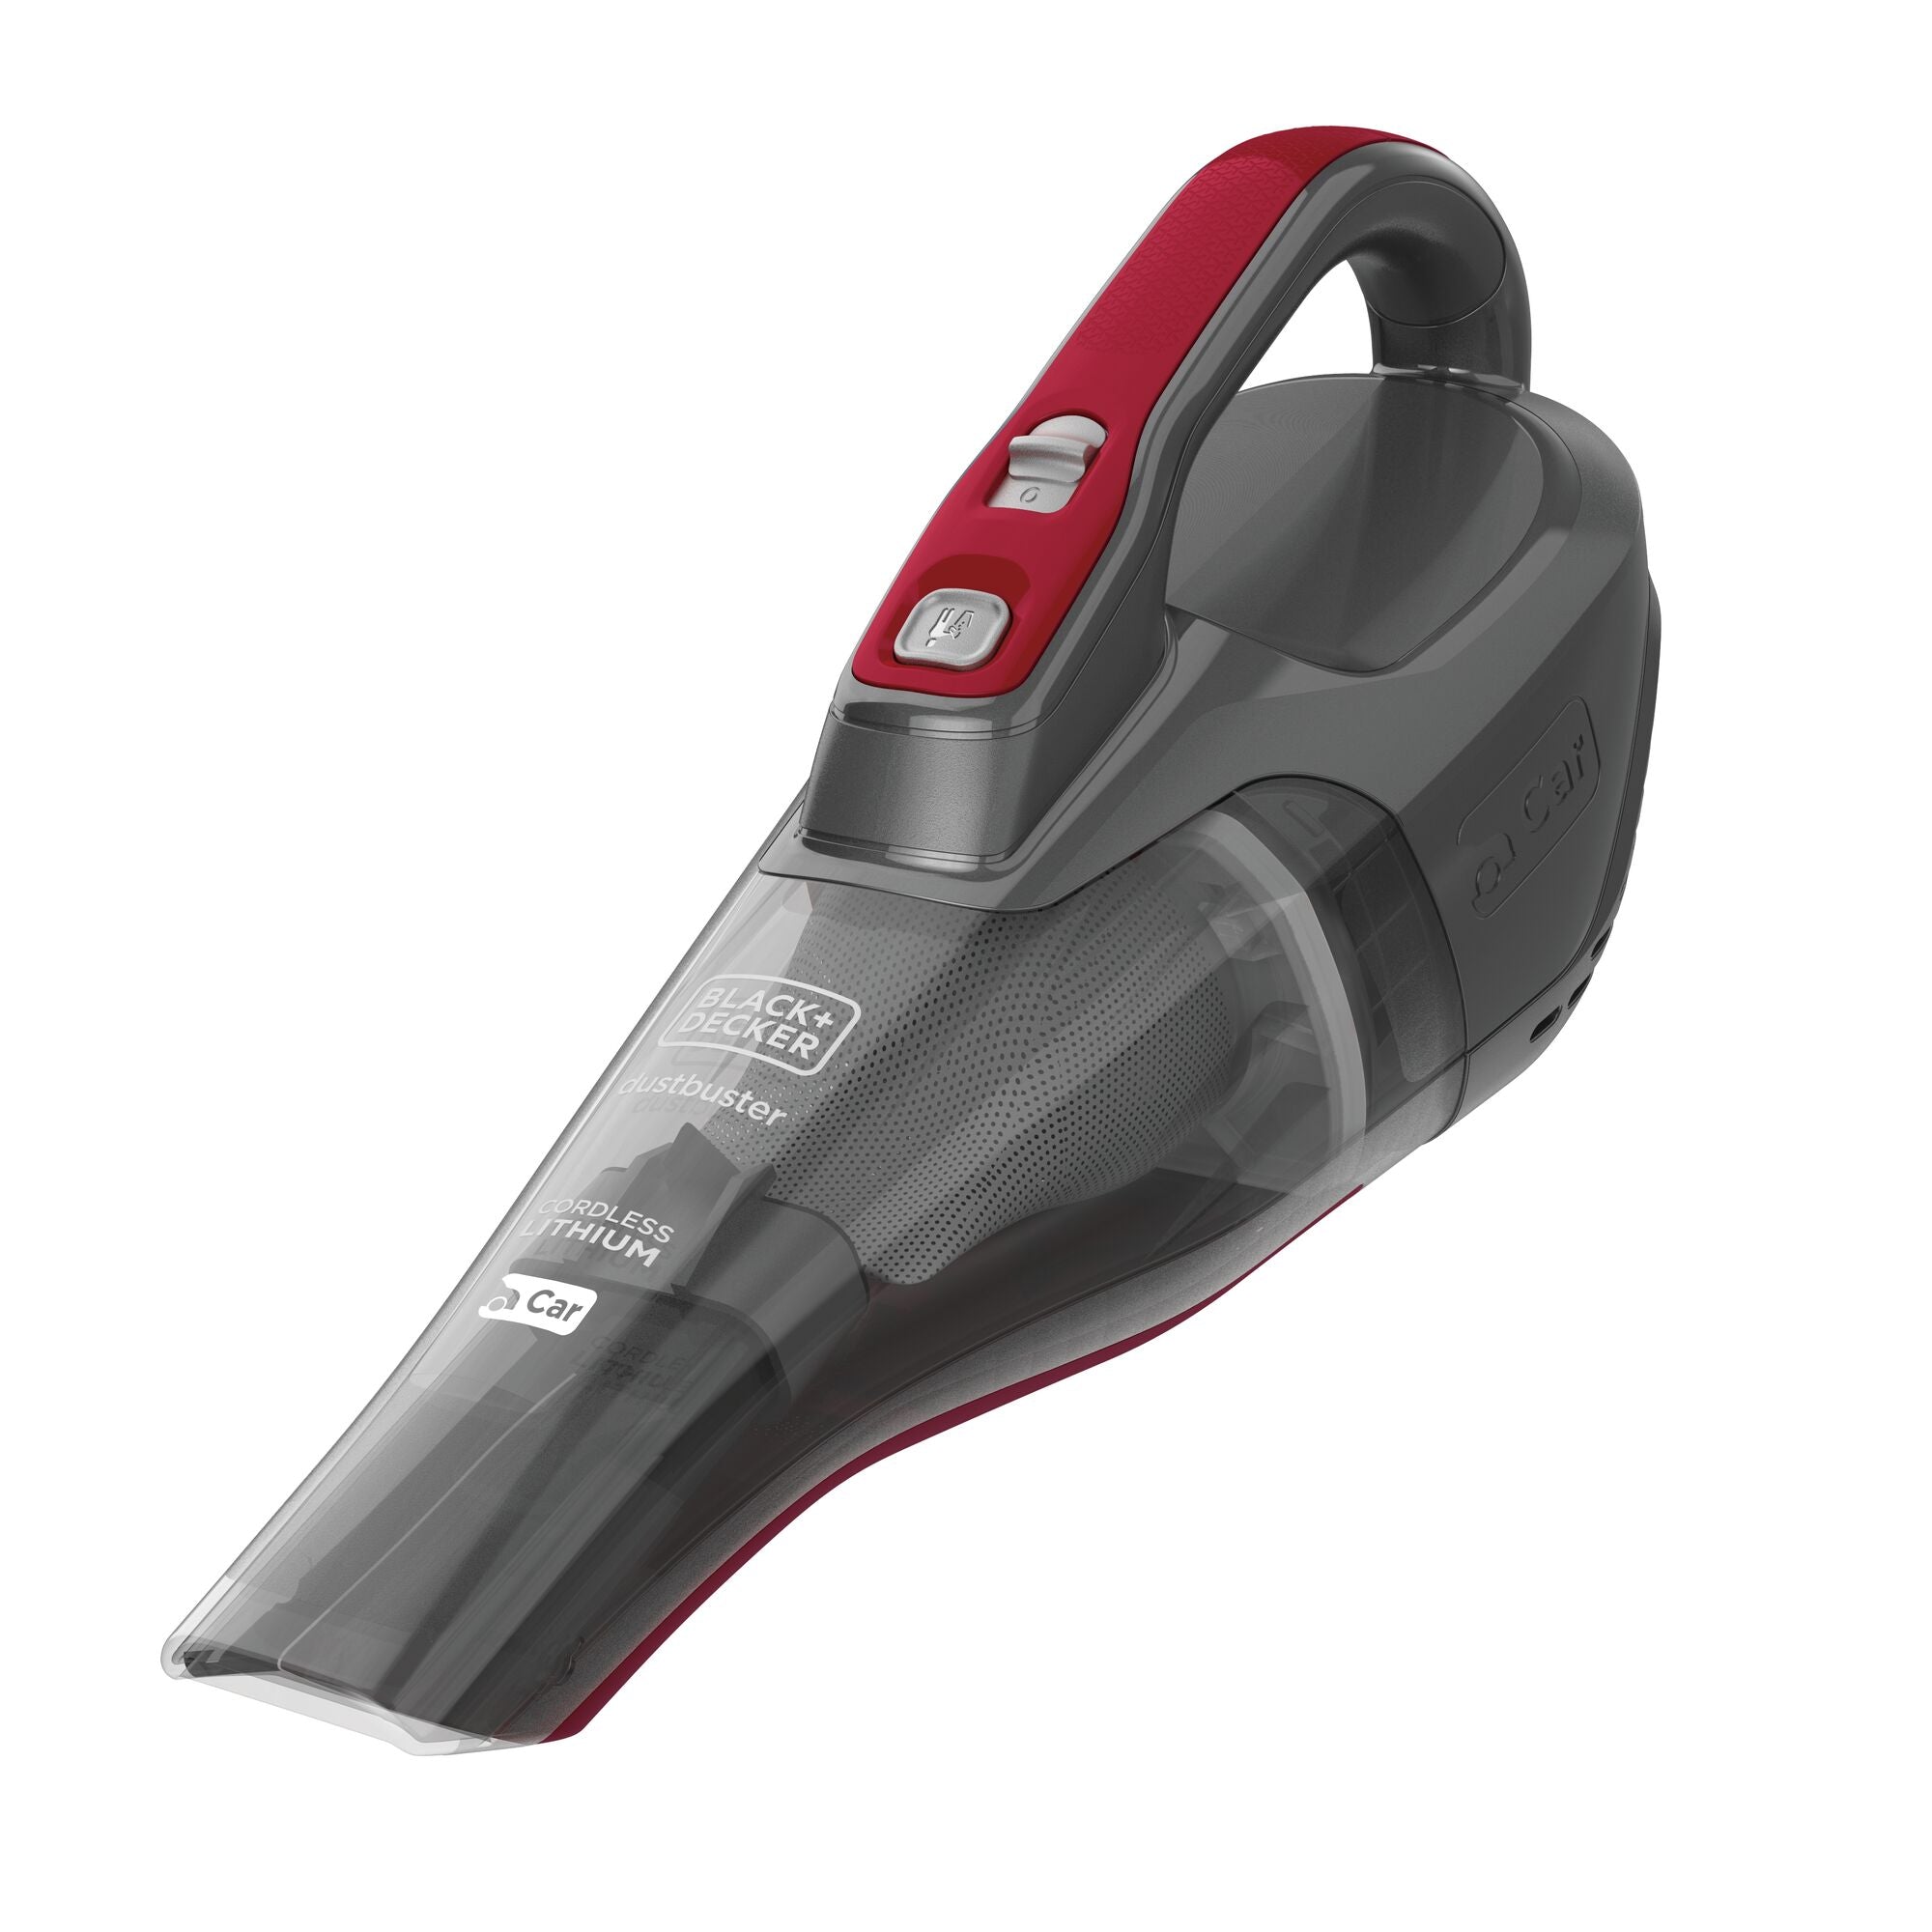 Dustbuster Quickclean Car Cordless Hand Vacuum With Motorized Upholstery  Brush